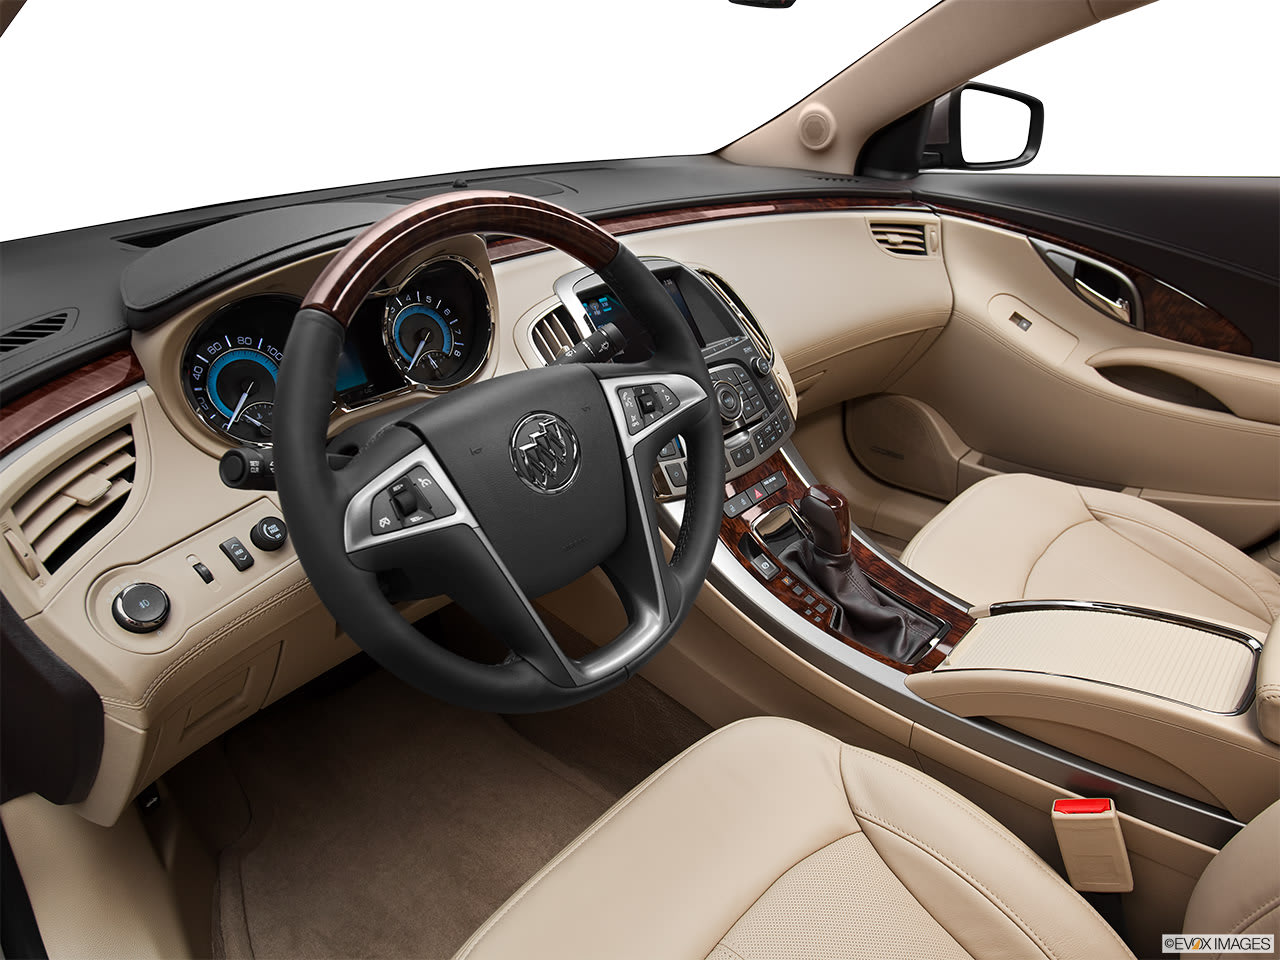 A Buyer's Guide to the 2012 Buick LaCrosse | YourMechanic Advice